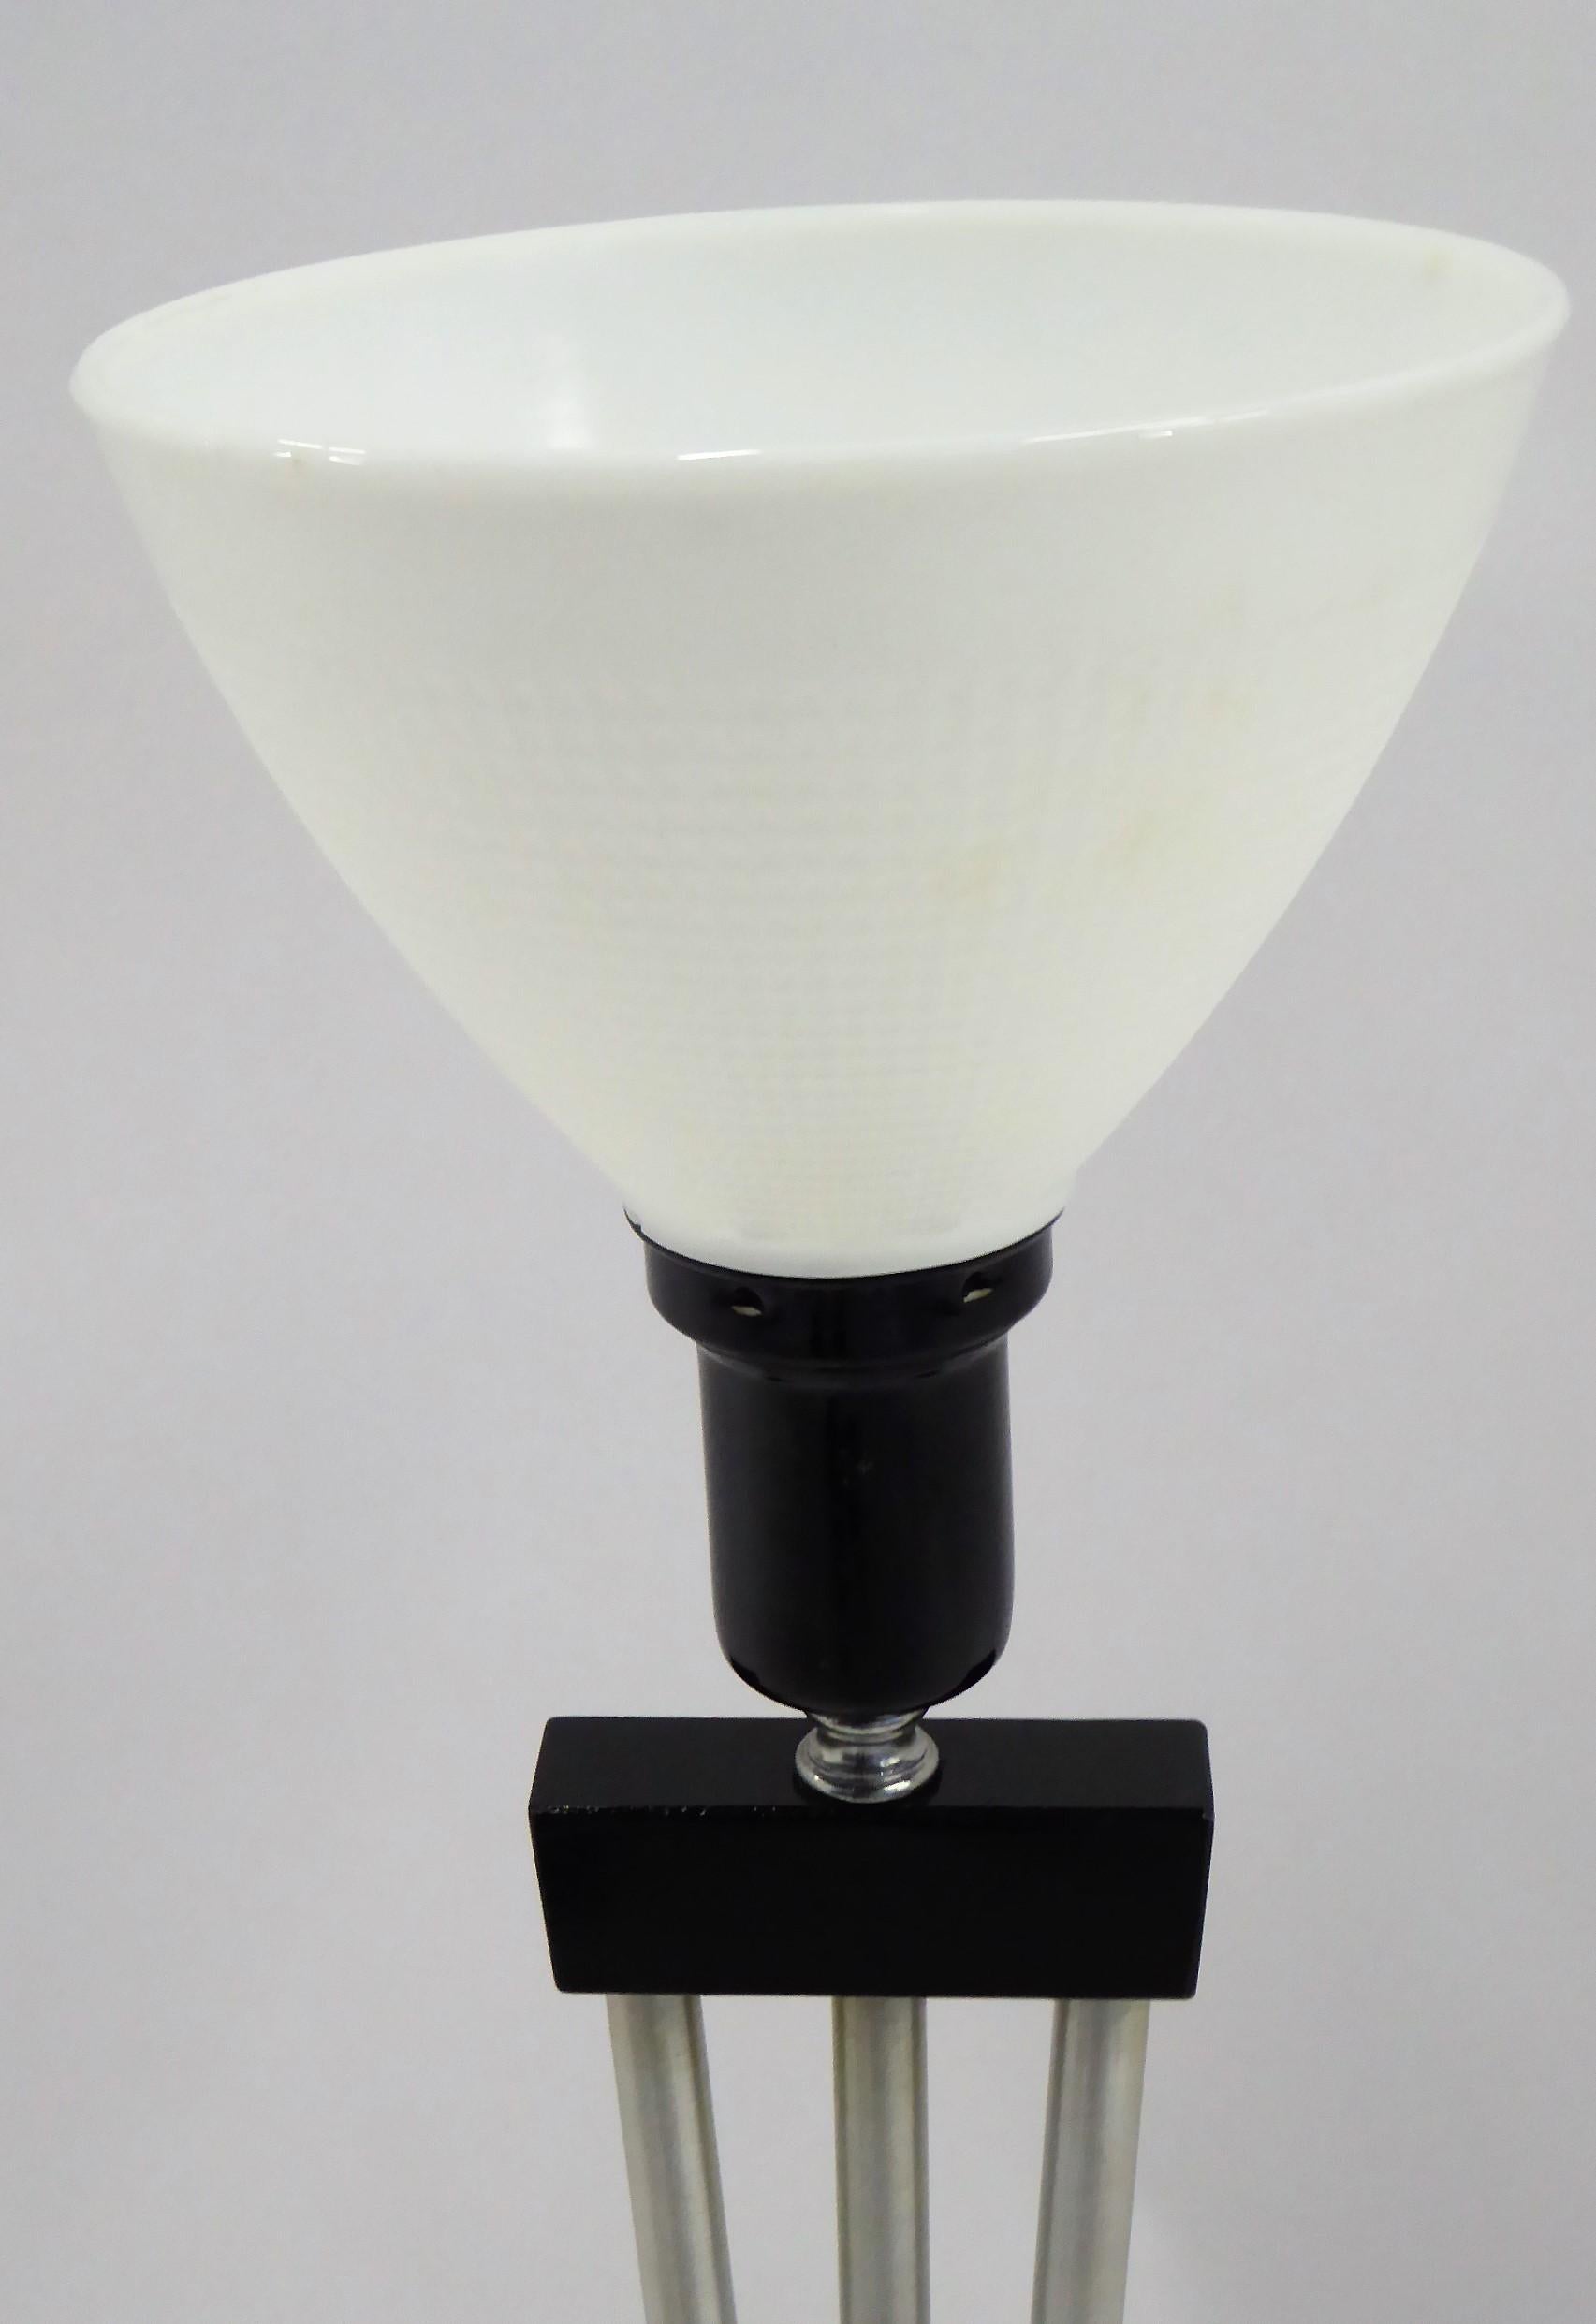  Russell Wright Spun Aluminum and Black Wood Table Lamp with Milk Glass Globe 2